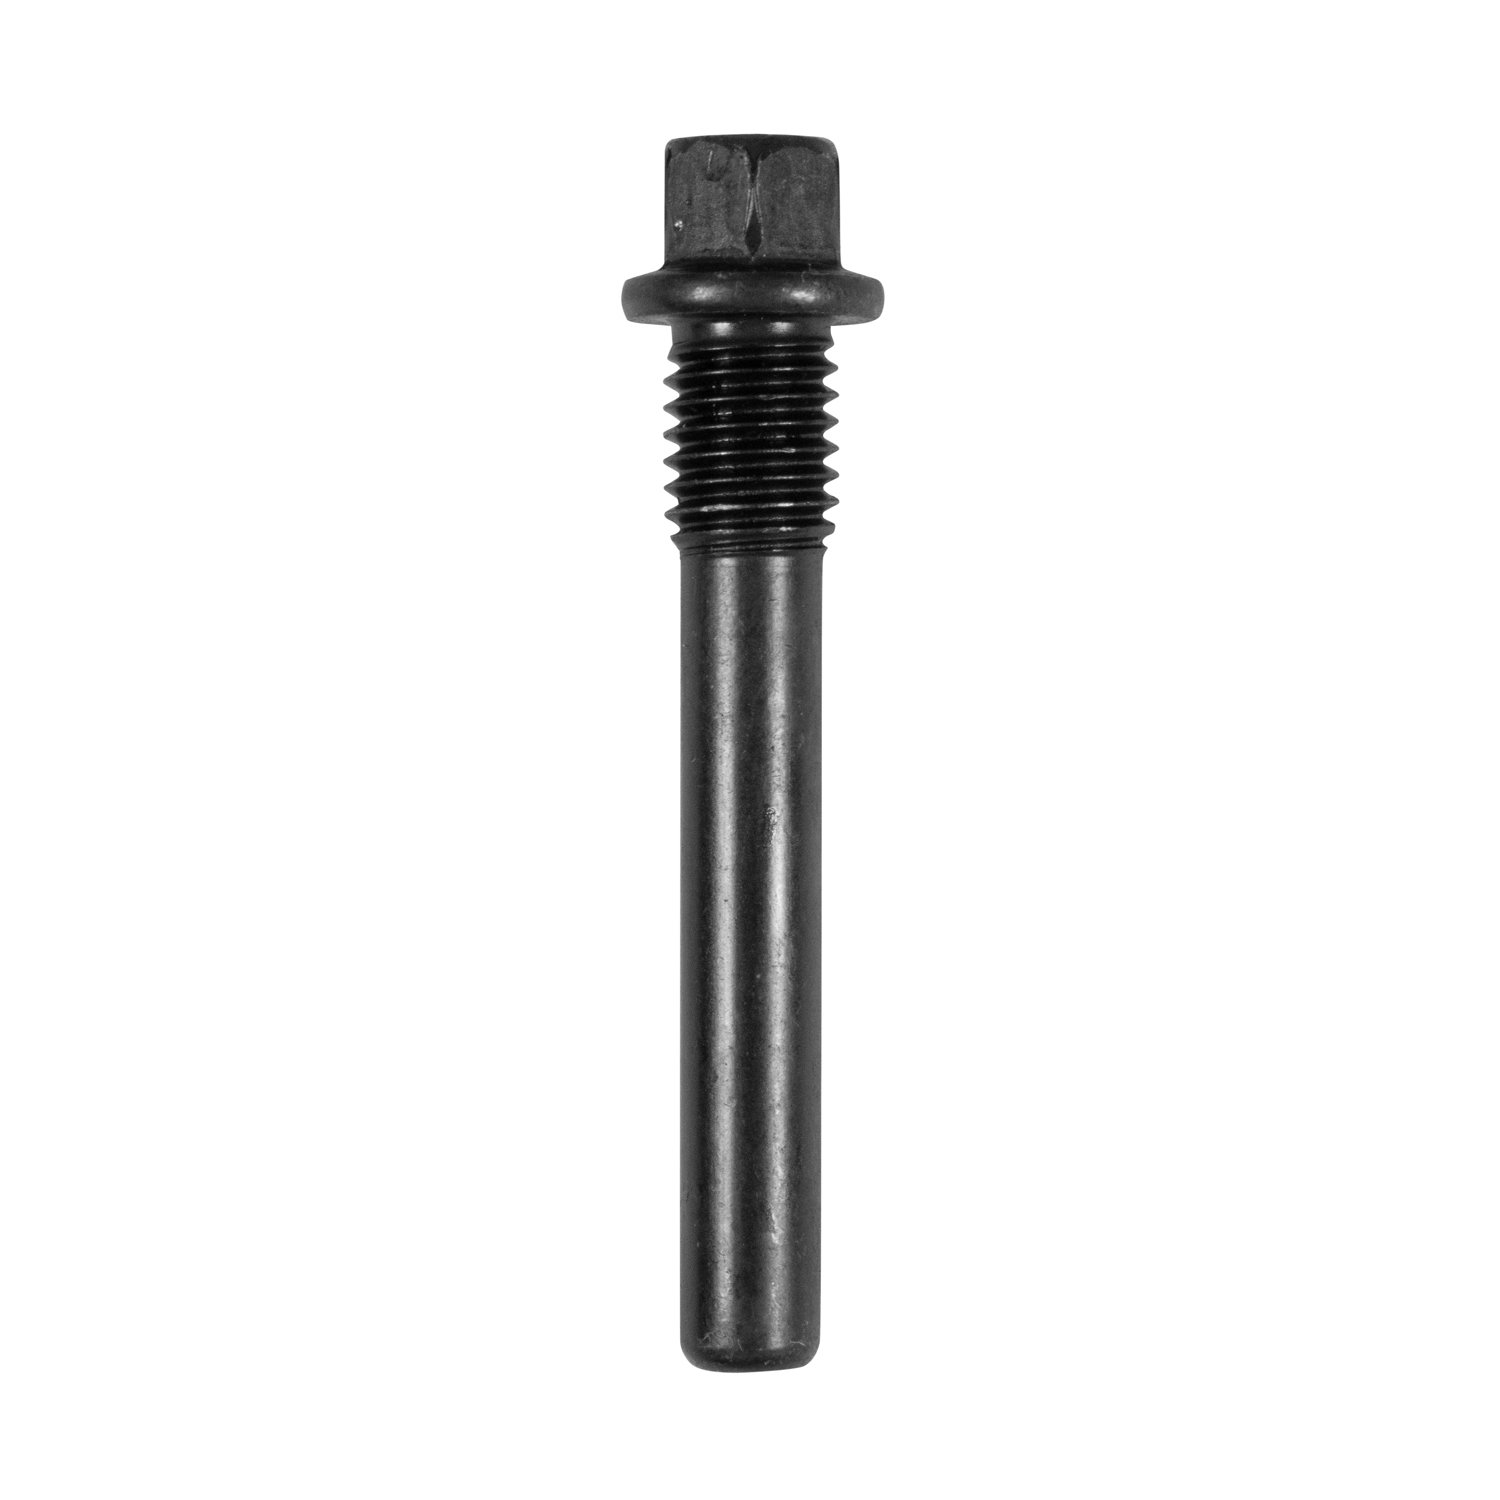 Standard Open And Gov-Loc Cross Pin Bolt, M10X1.5 Thread For GM 9.5 in./9.25 in. Ifs